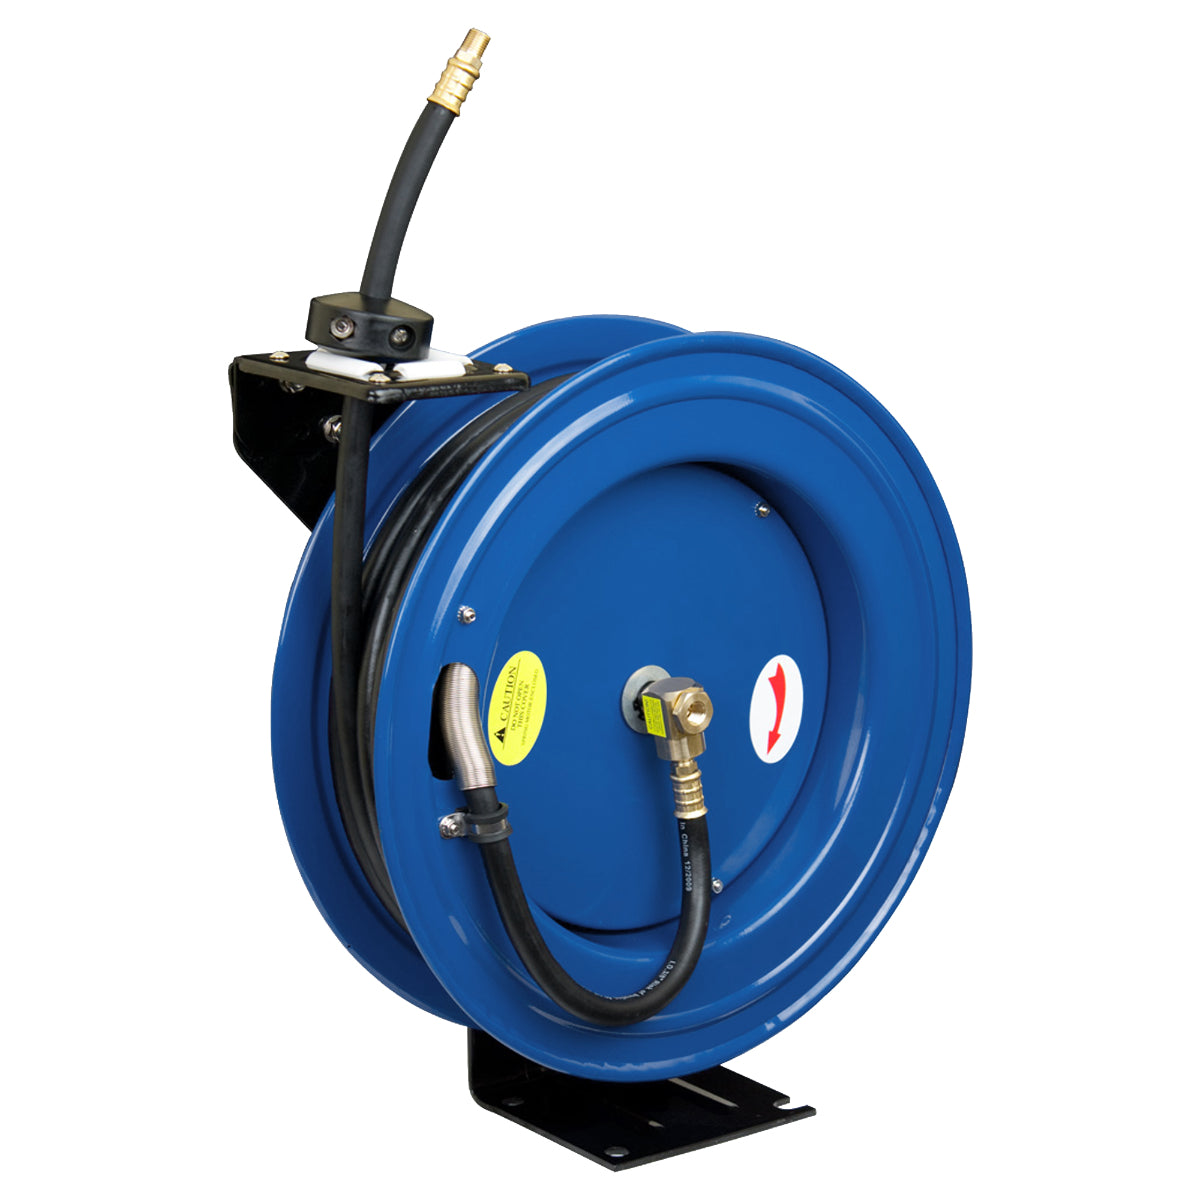 Cyclone CP3688 Pneumatic 50 ft. x 3/8 in. Retractable Air Hose Reel